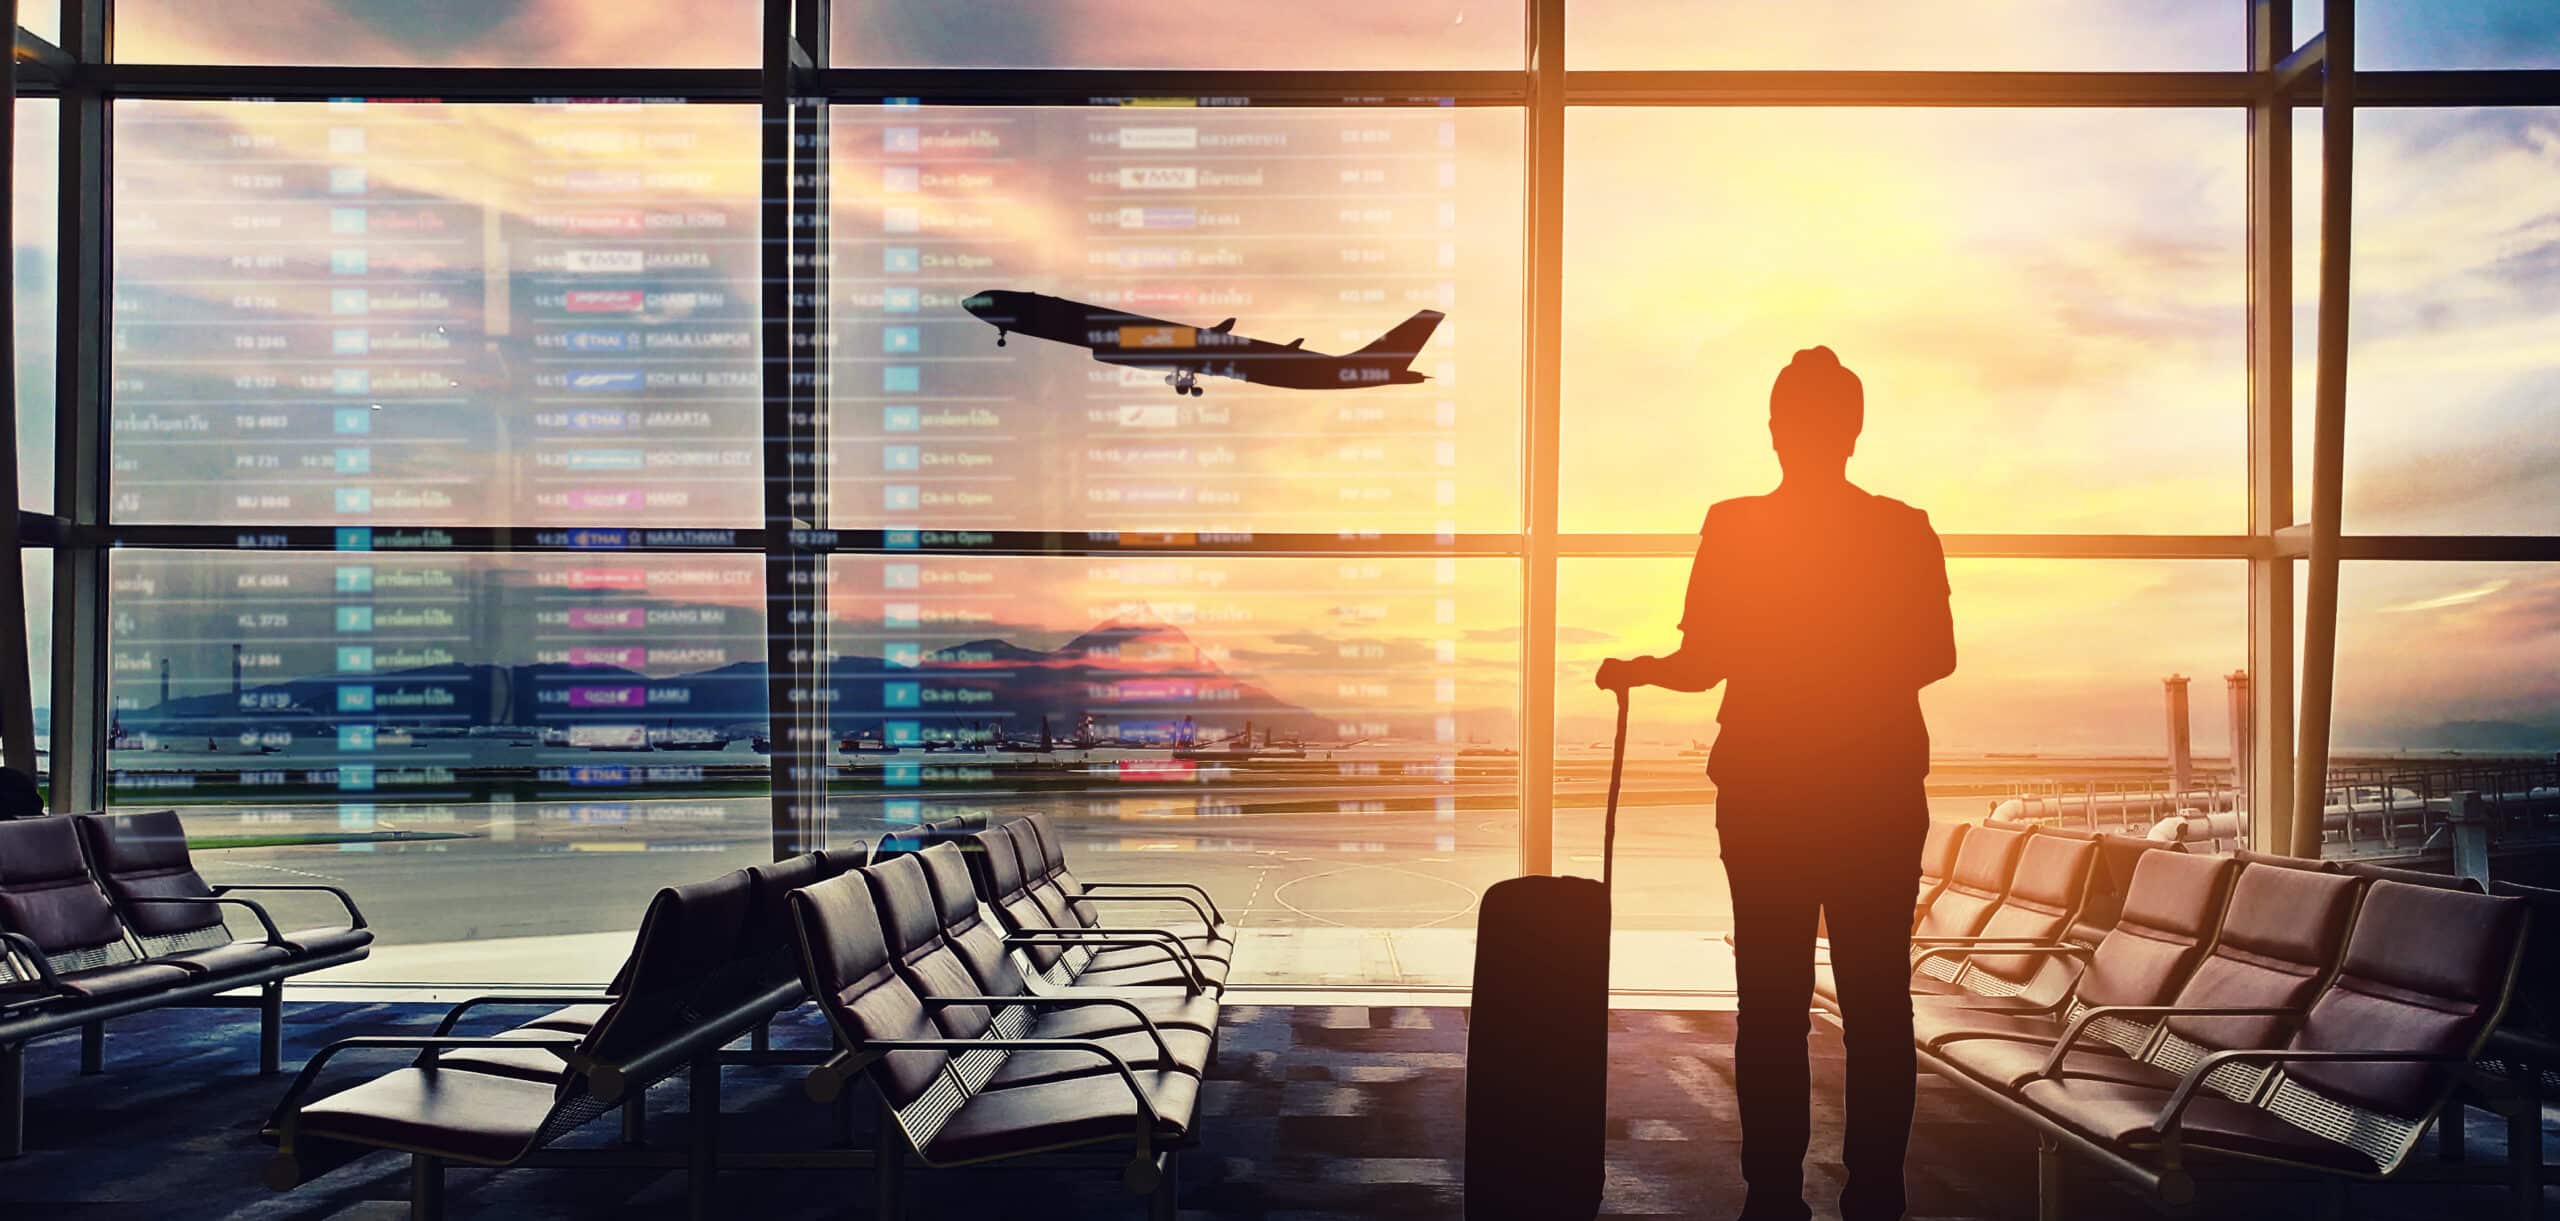 Silhouette of a person standing at an airport window overlooking the runway, symbolizing Global Risk Solutions' commitment to secure and vigilant travel security services.